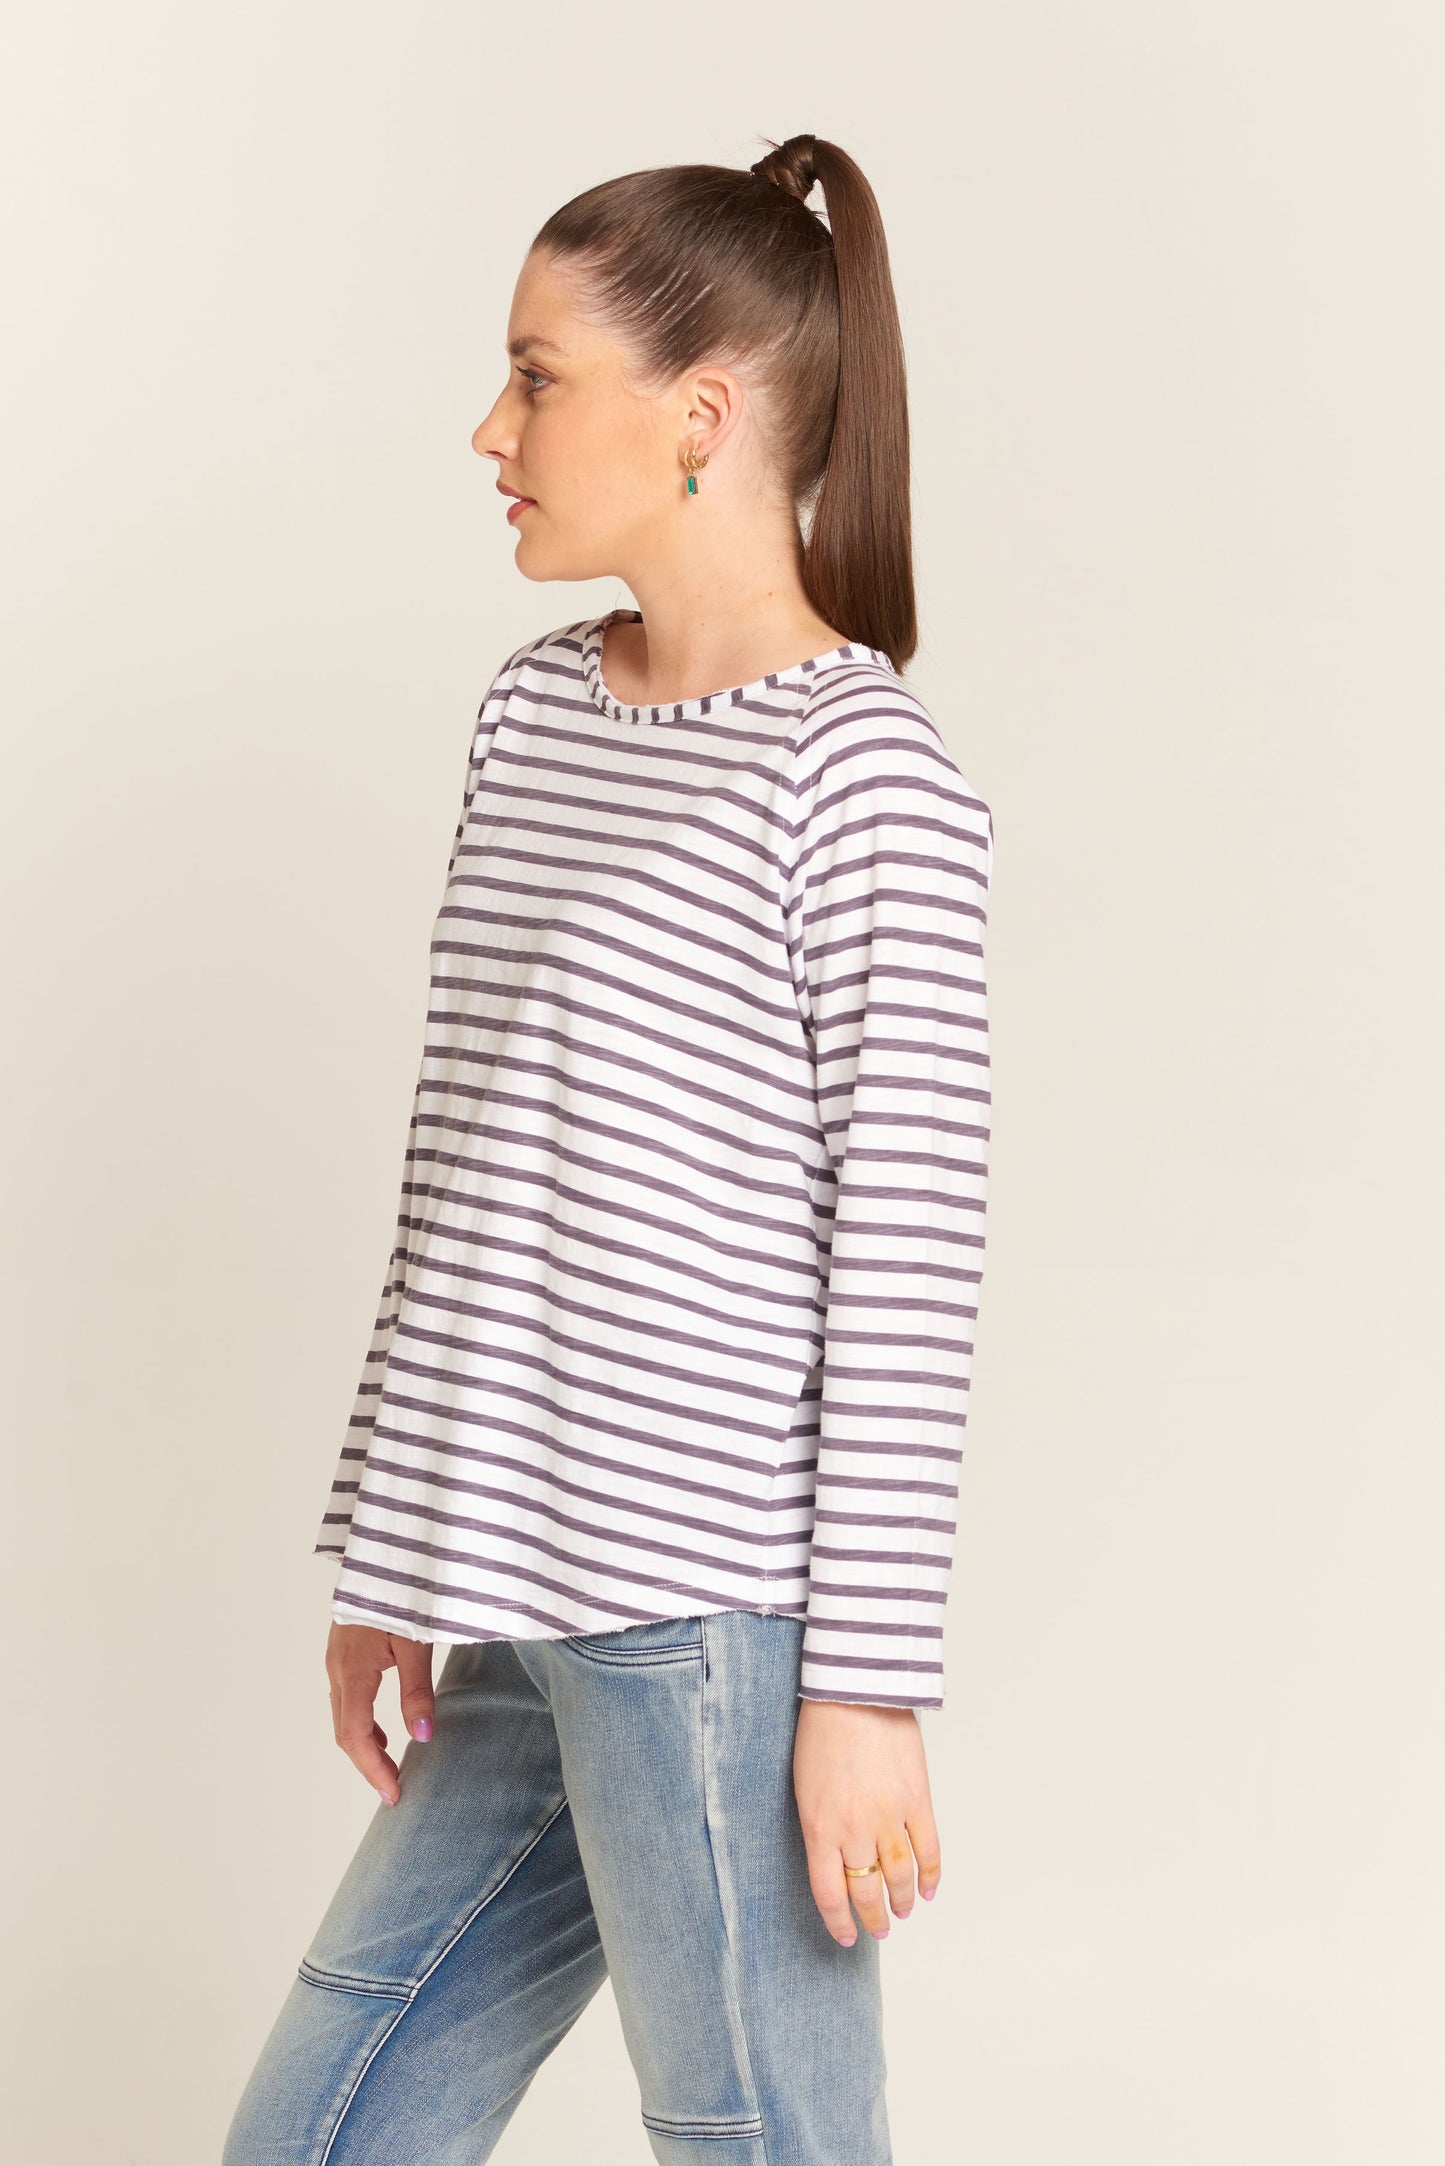 Cloth Paper Scissors Long Sleeve Stripe Printed Top White/Charcoal | CPS1214-13